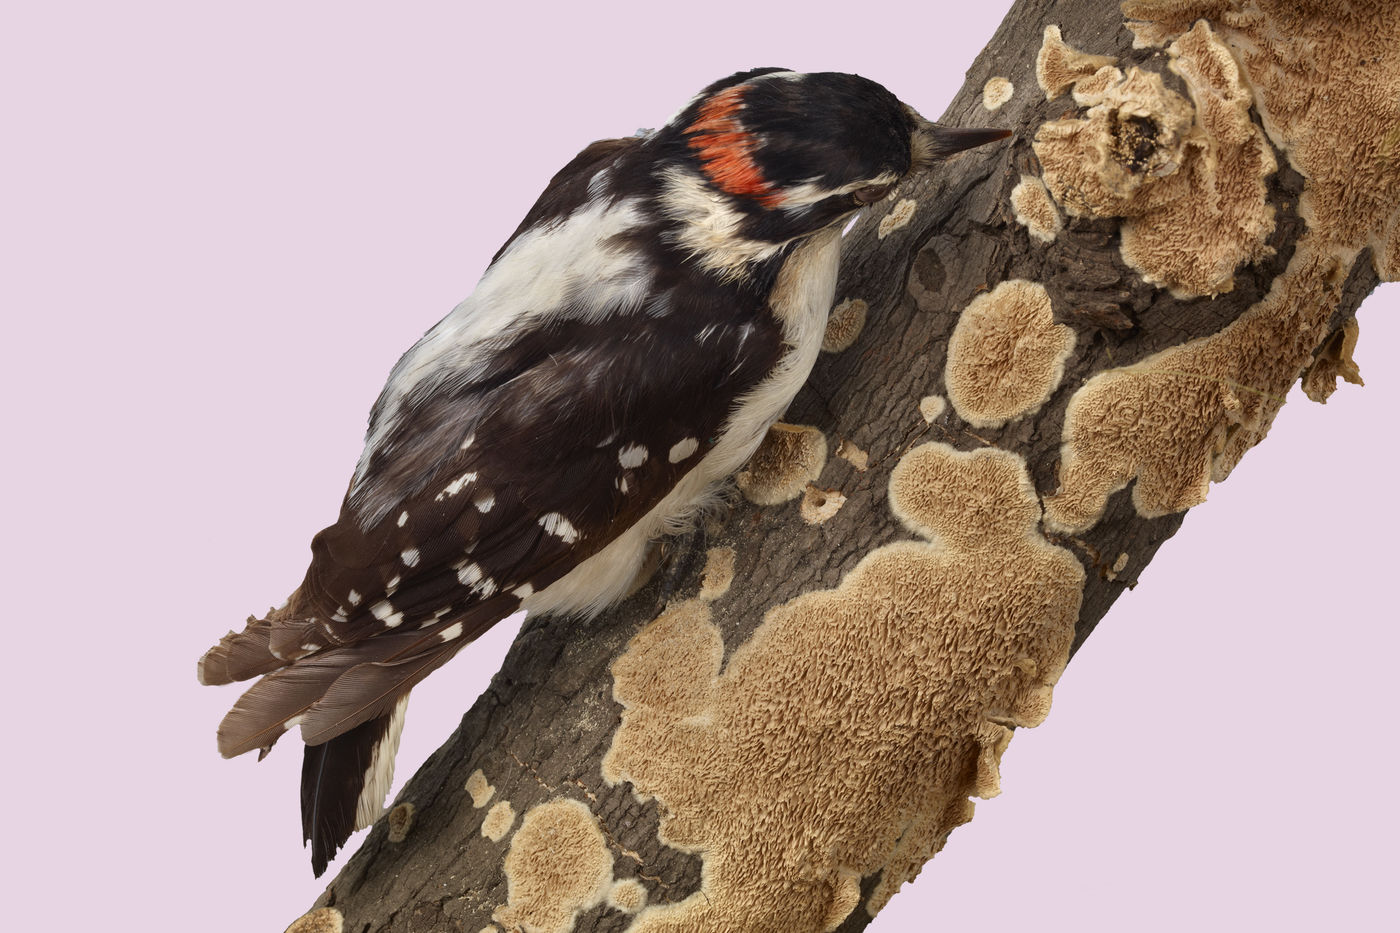 Downy Woodpeckers have highly evolved tongues that they can extend deep inside trees to grab food. They use their small bills to chisel out nest holes and knock against hard surfaces to attract mates and claim territory. Look for them around Chicago.